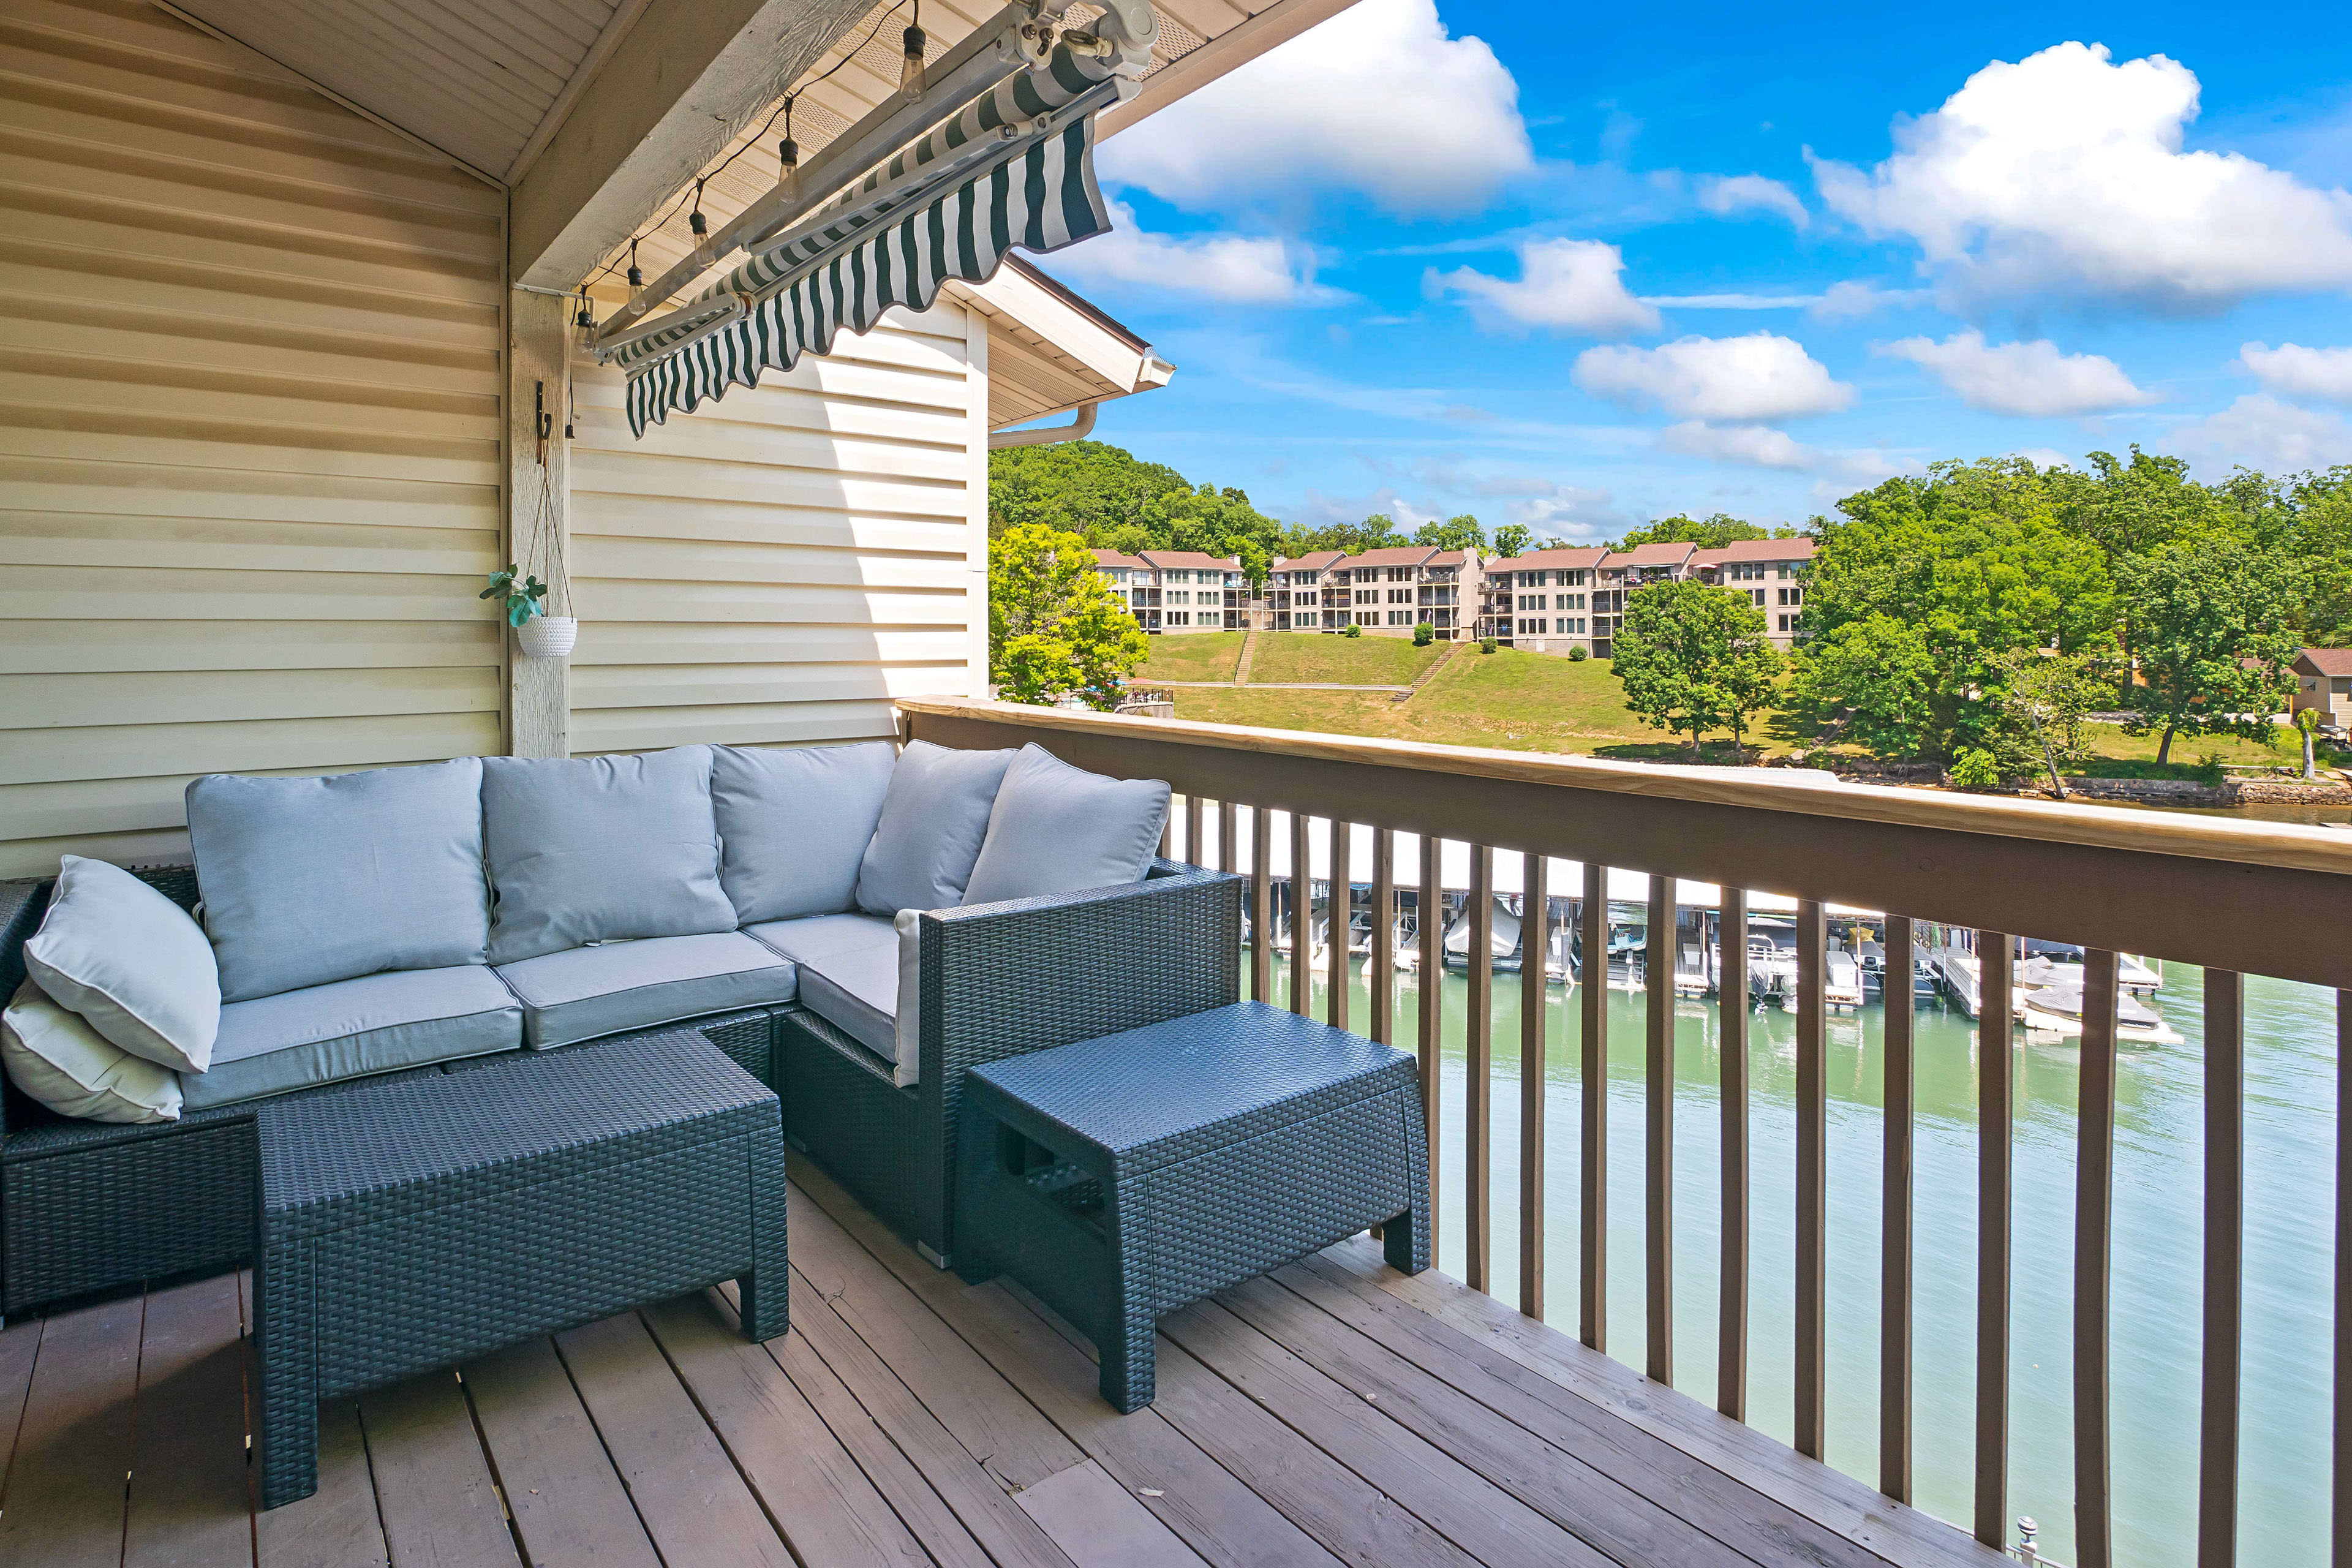 Balcony | Outdoor Seating | Gas Grill | Lake Views